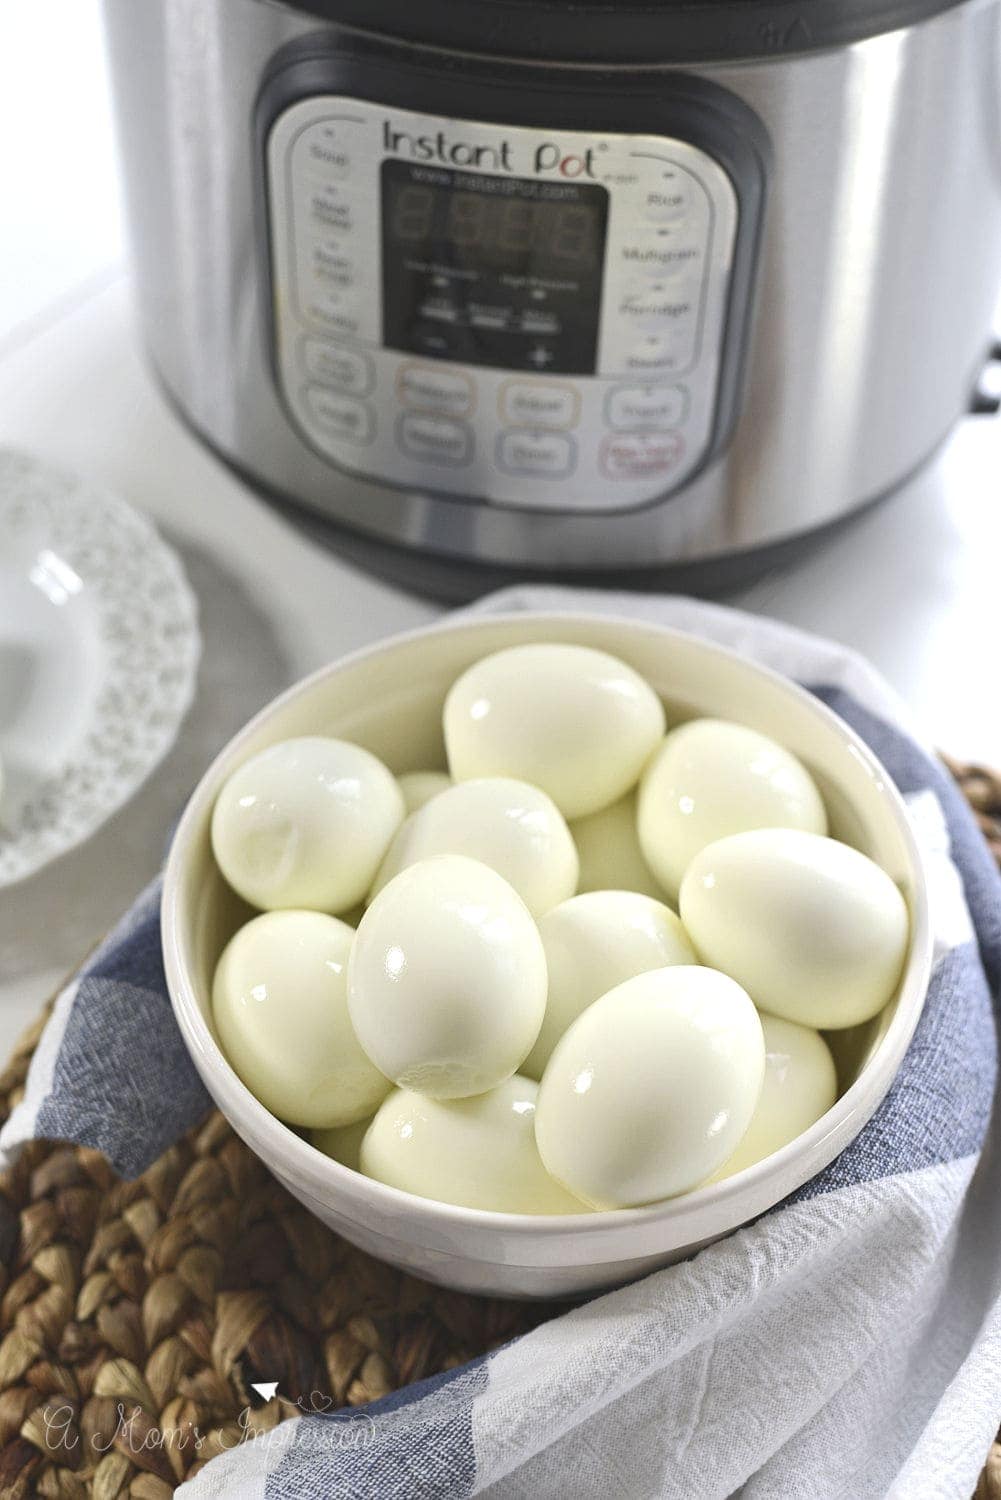 A bowl of hard boiled eggs sitting in front of an Instant Pot pressure cooker